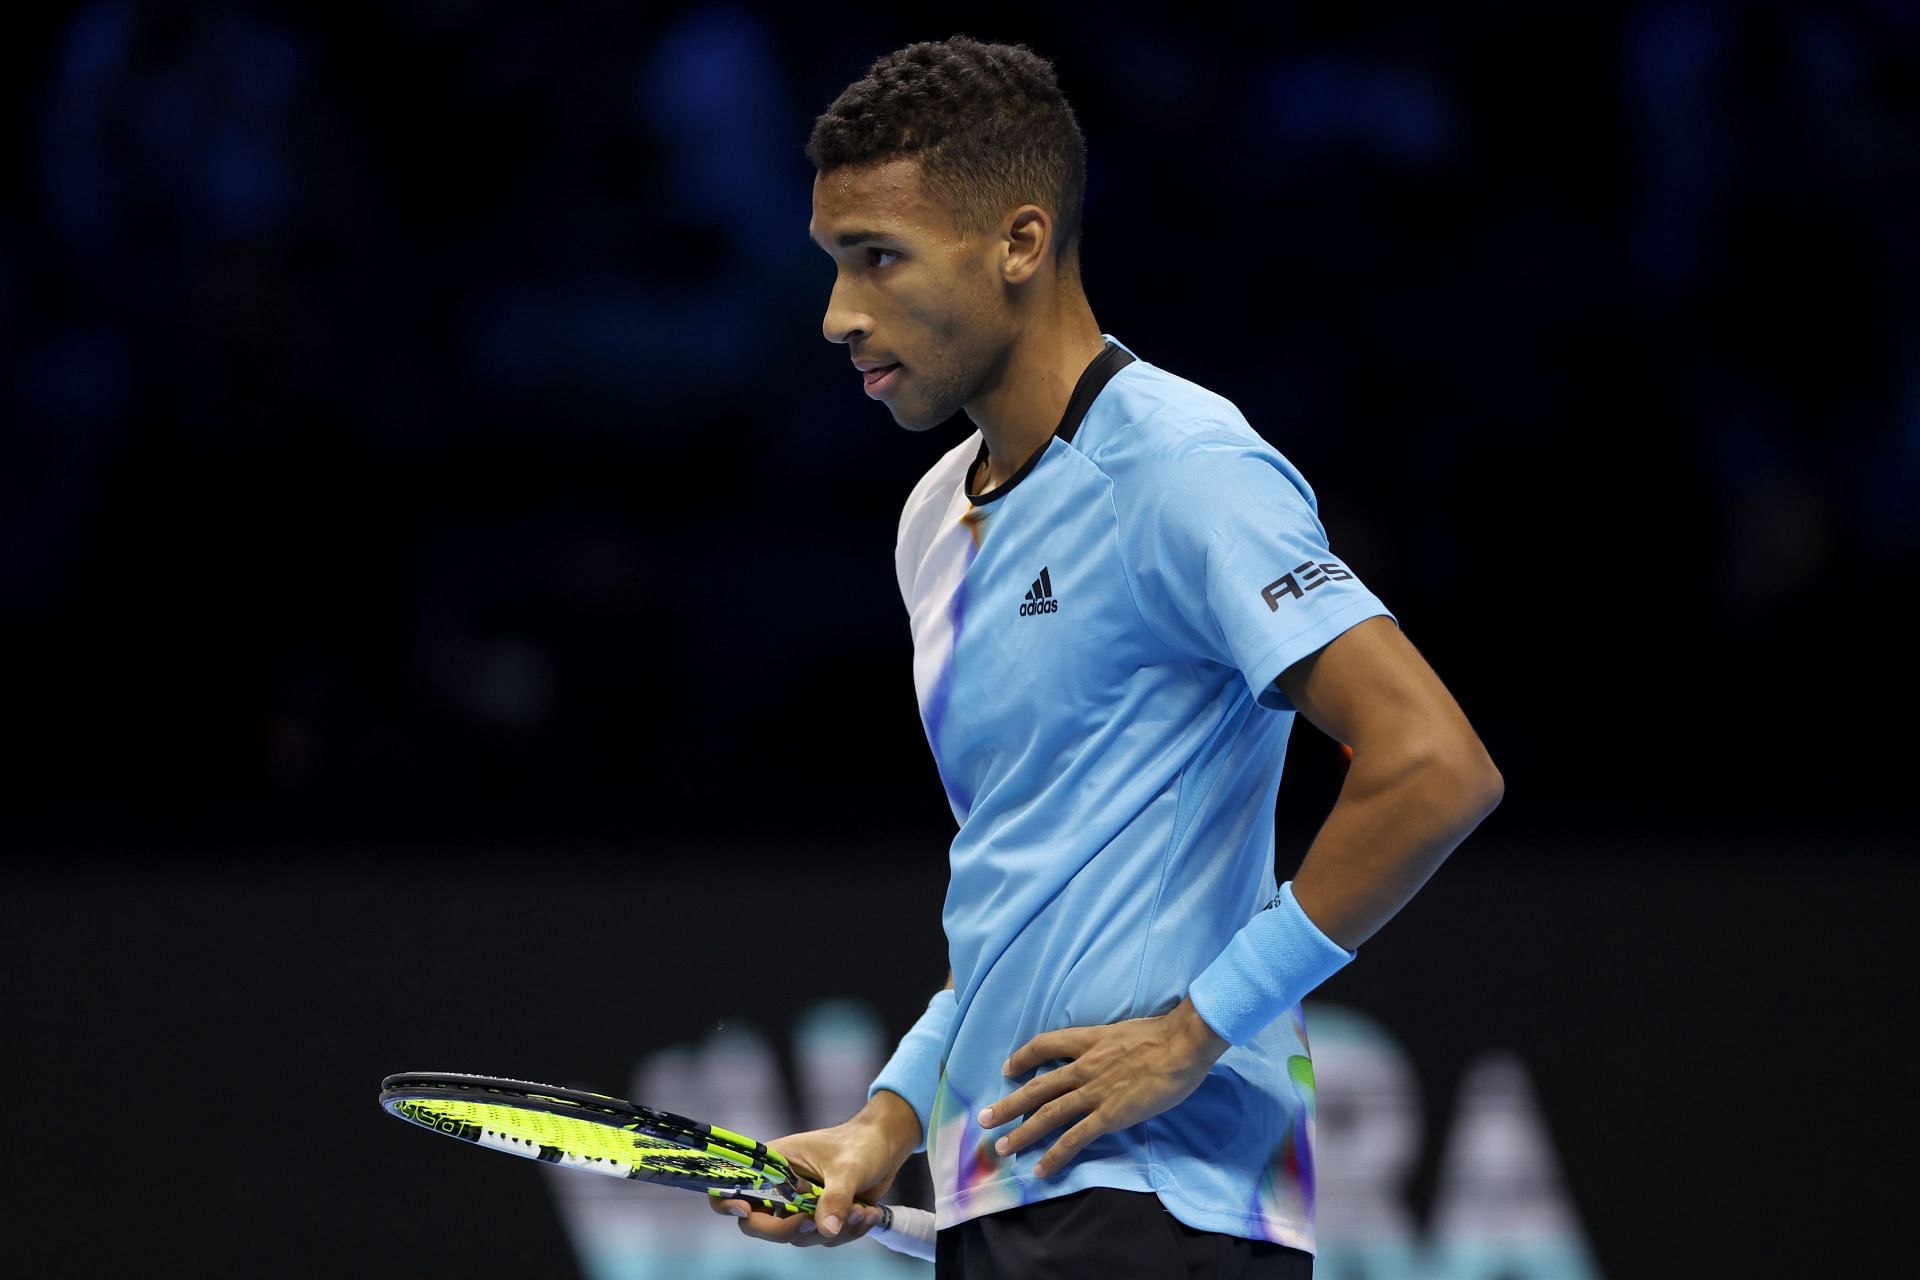 Felix Auger-Aliassime was pictured at the Nitto ATP Finals.